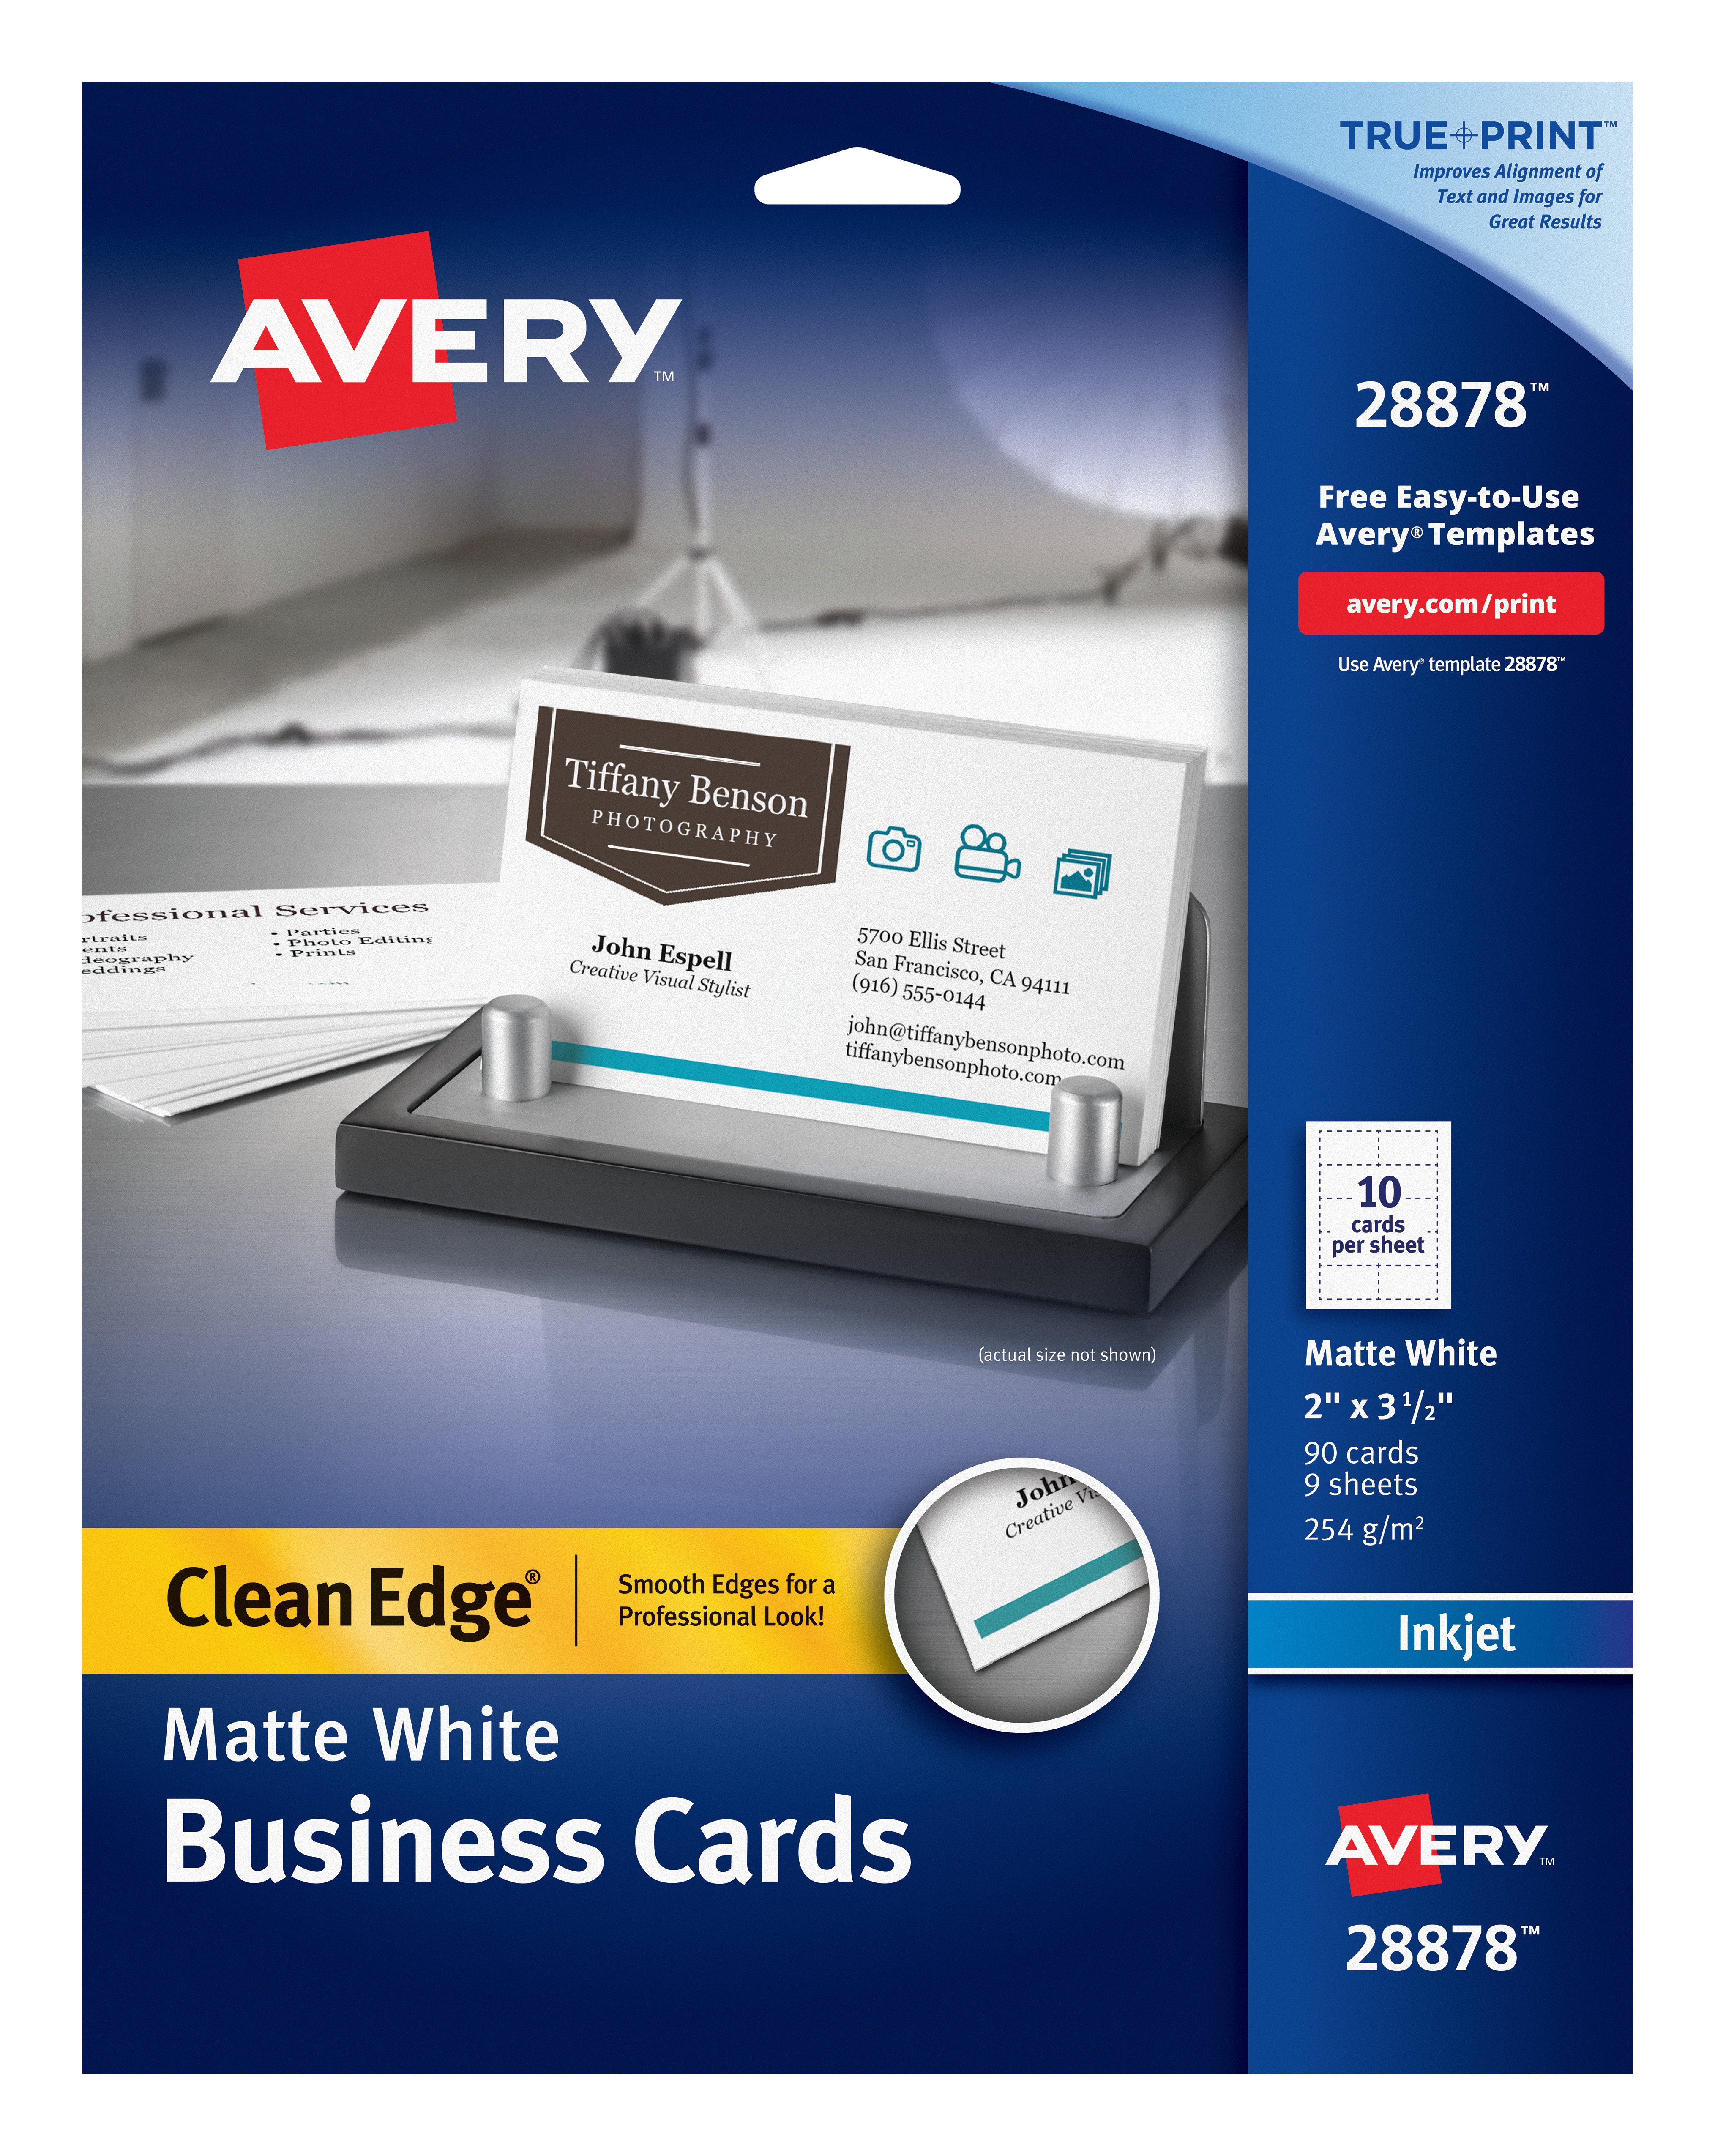 Avery Clean Edge Business Cards True Print Matte Two Sided Printing 2 X 3 1 2 90 Cards 28878 Avery business card template 28878